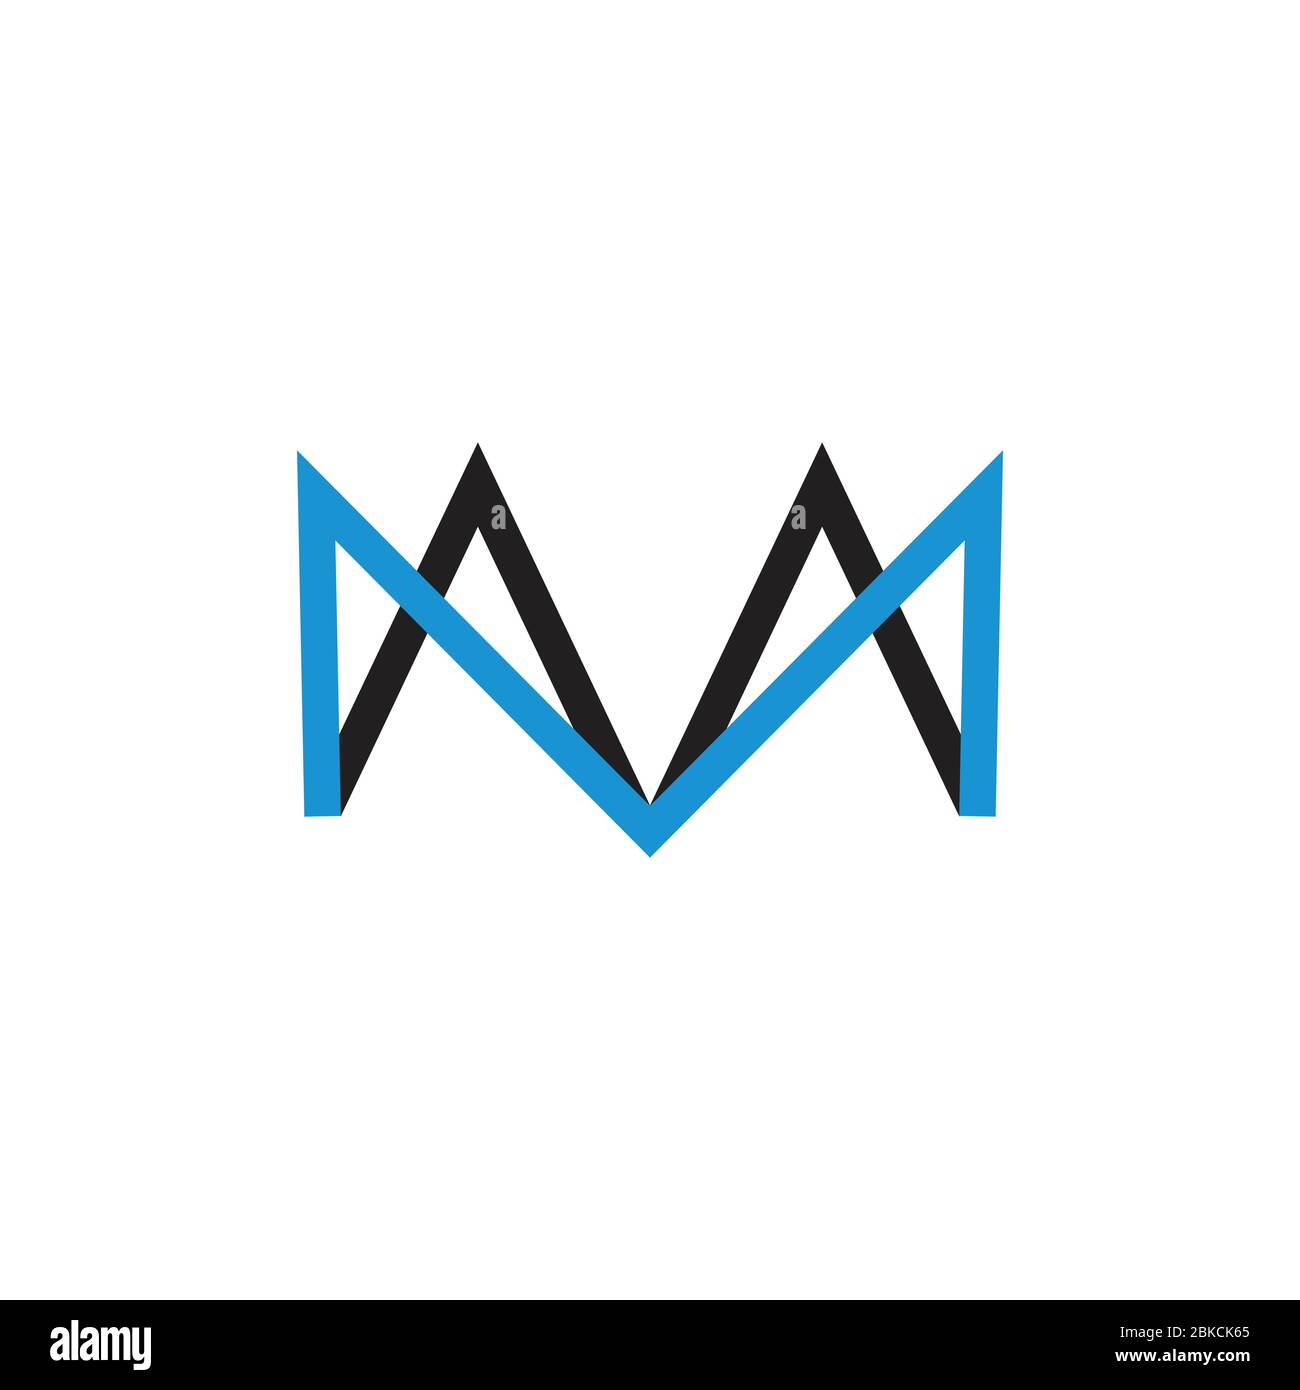 MM Logo monogram with vintage overlapping linked style on white